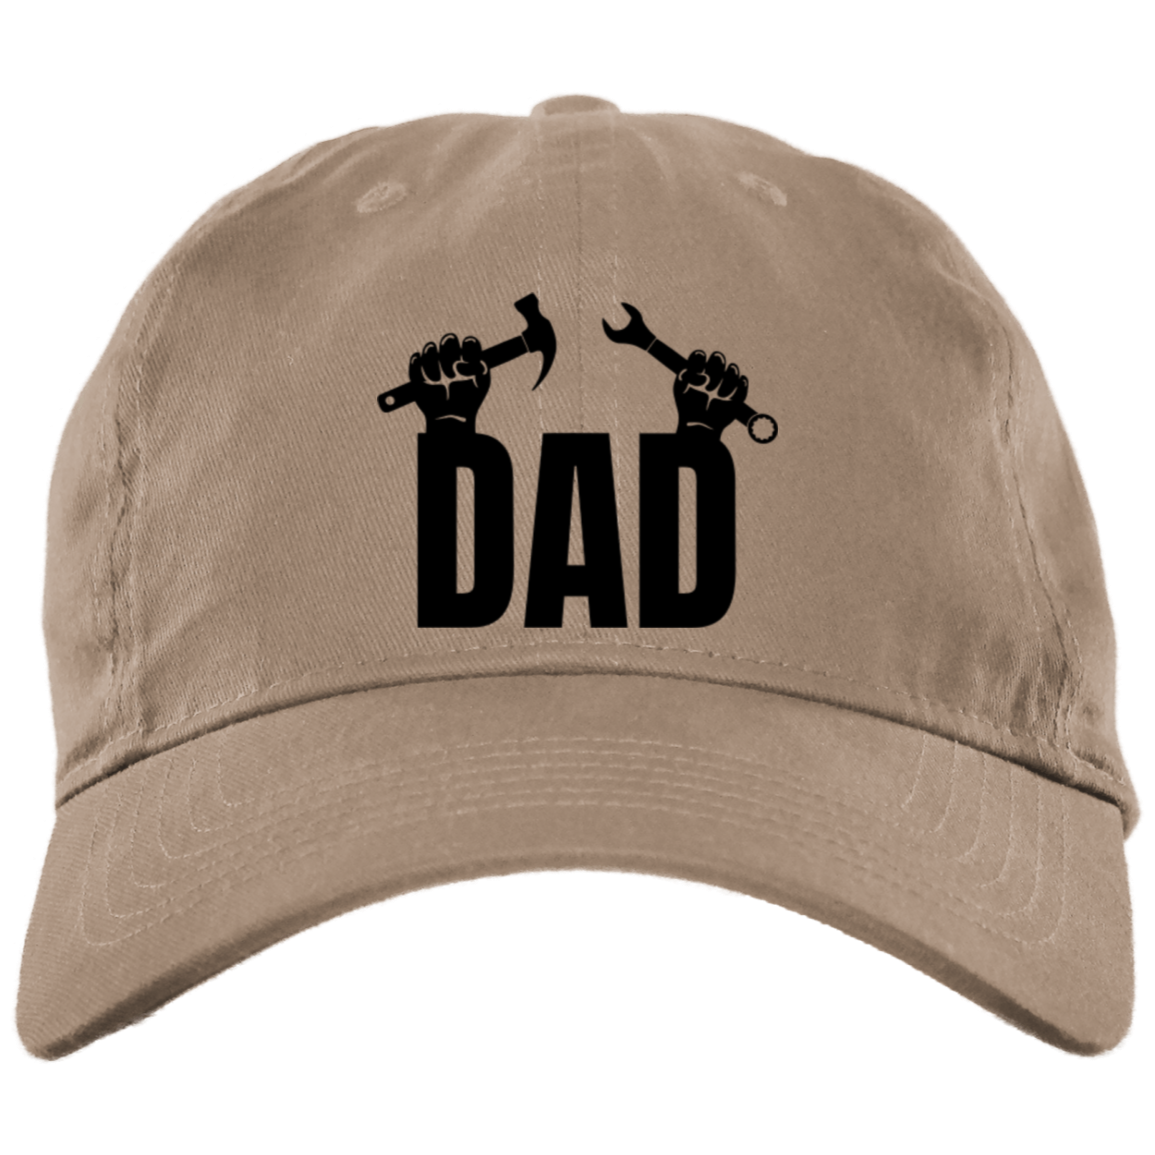 Dad Embroidered Brushed Twill Unstructured Dad Cap